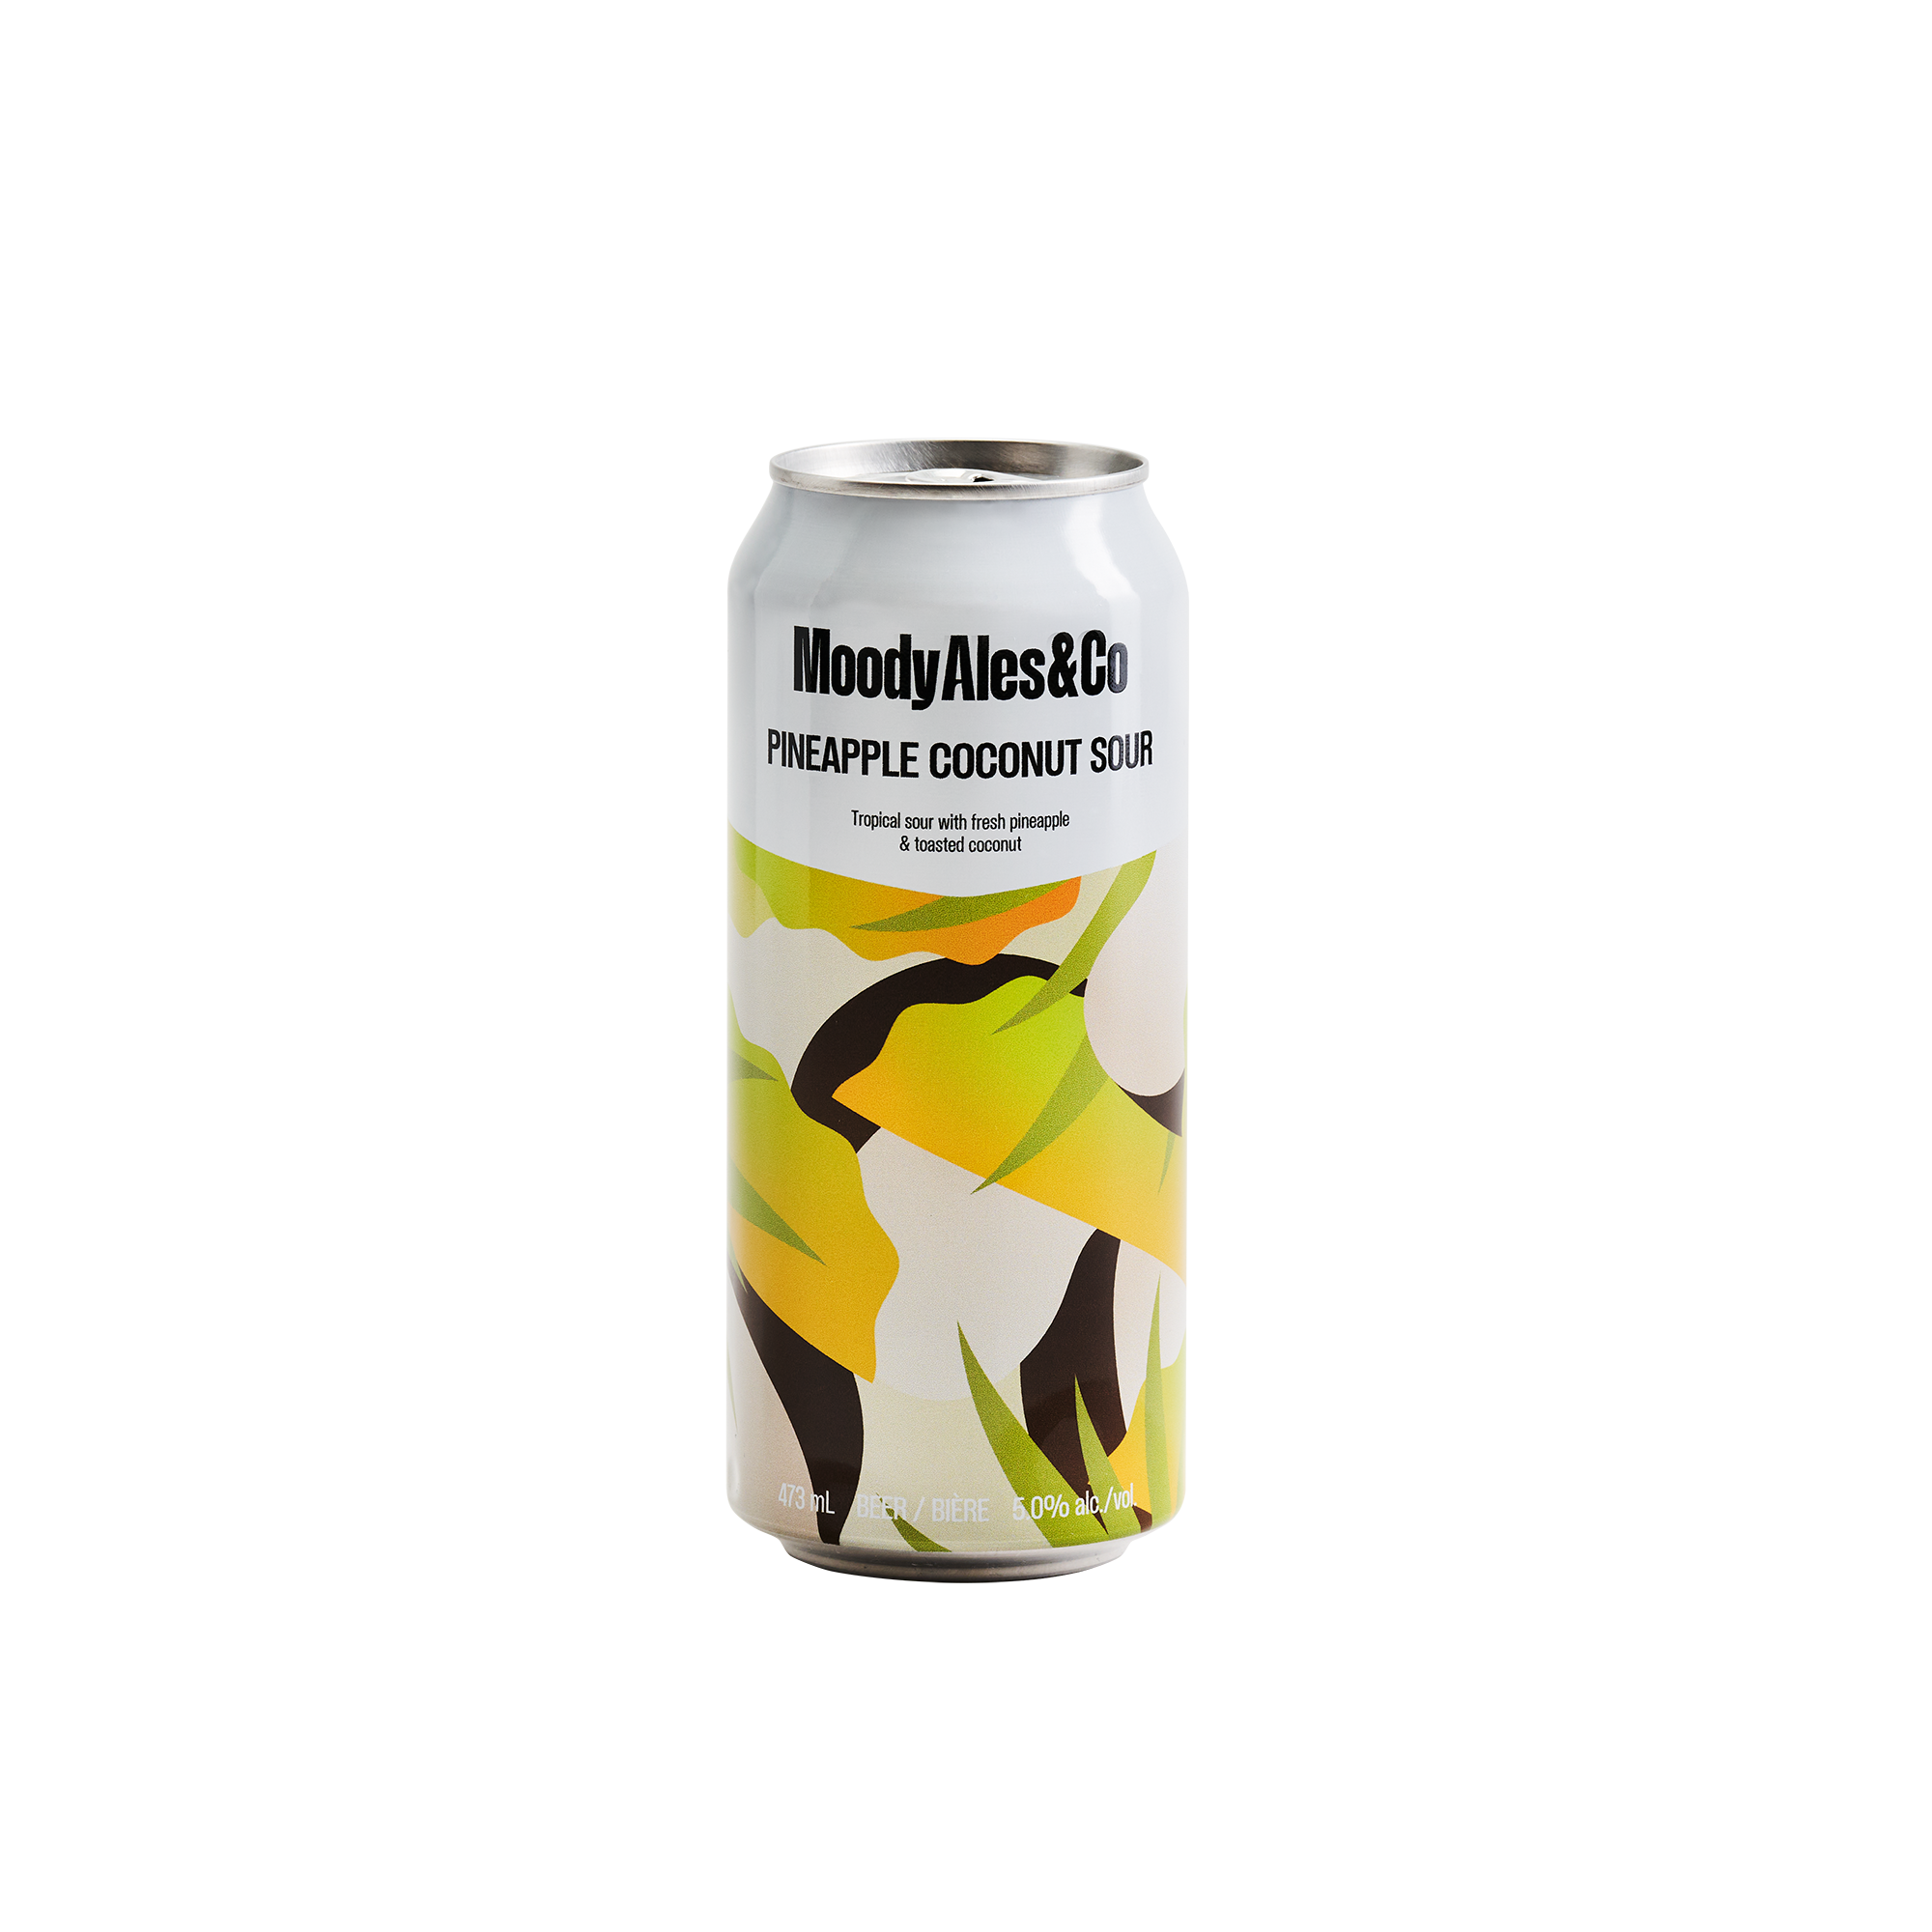 pineapple coconut sour can